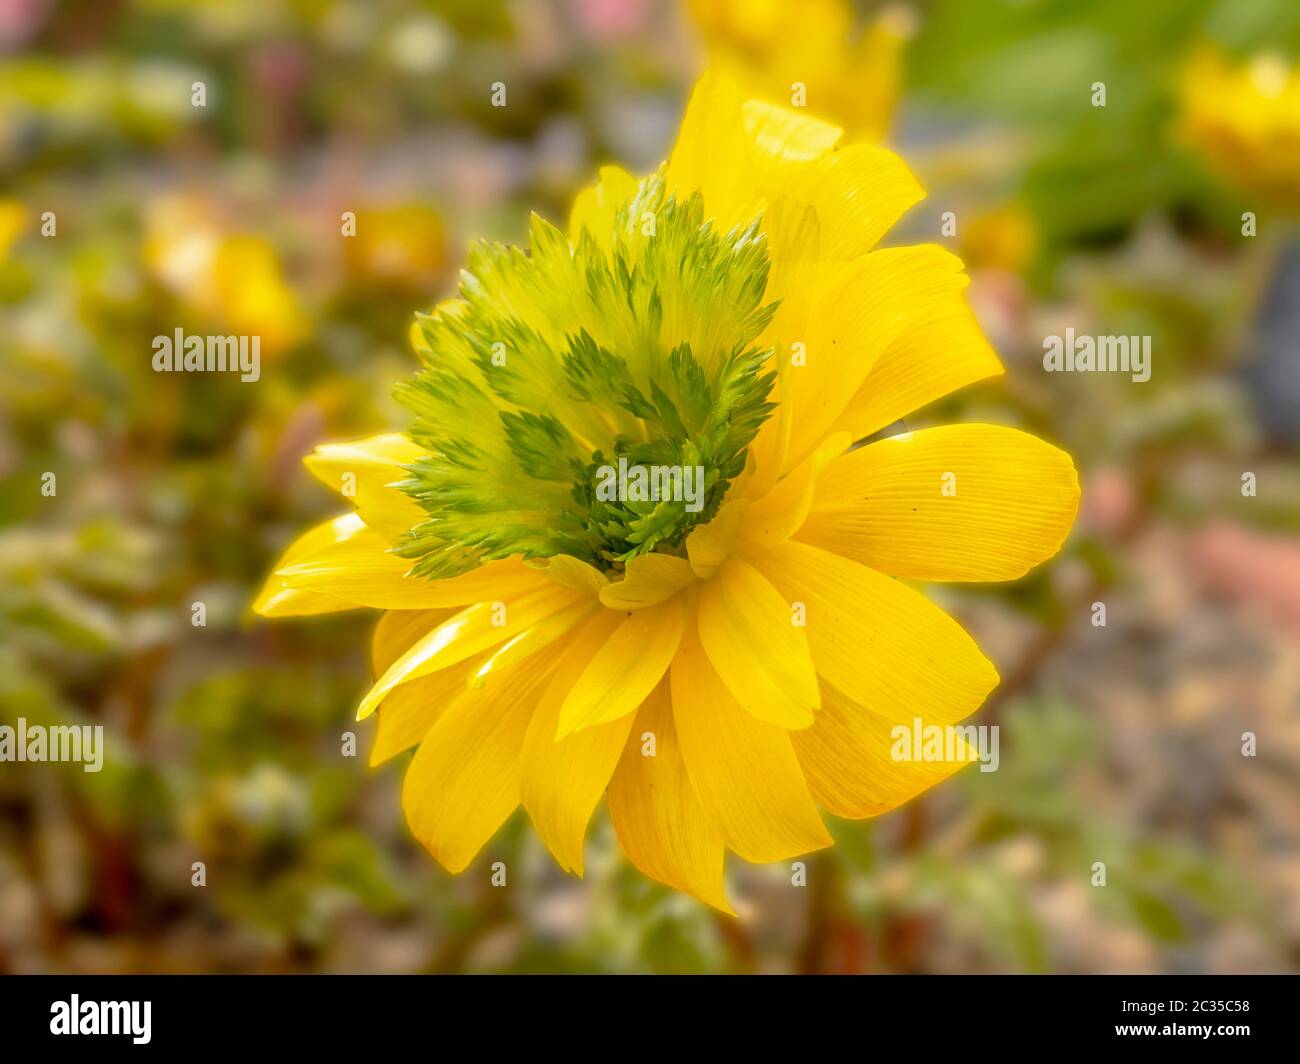 Closeup of a yellow and green flower of Adonis amurensis Hanazono in a garden Stock Photo